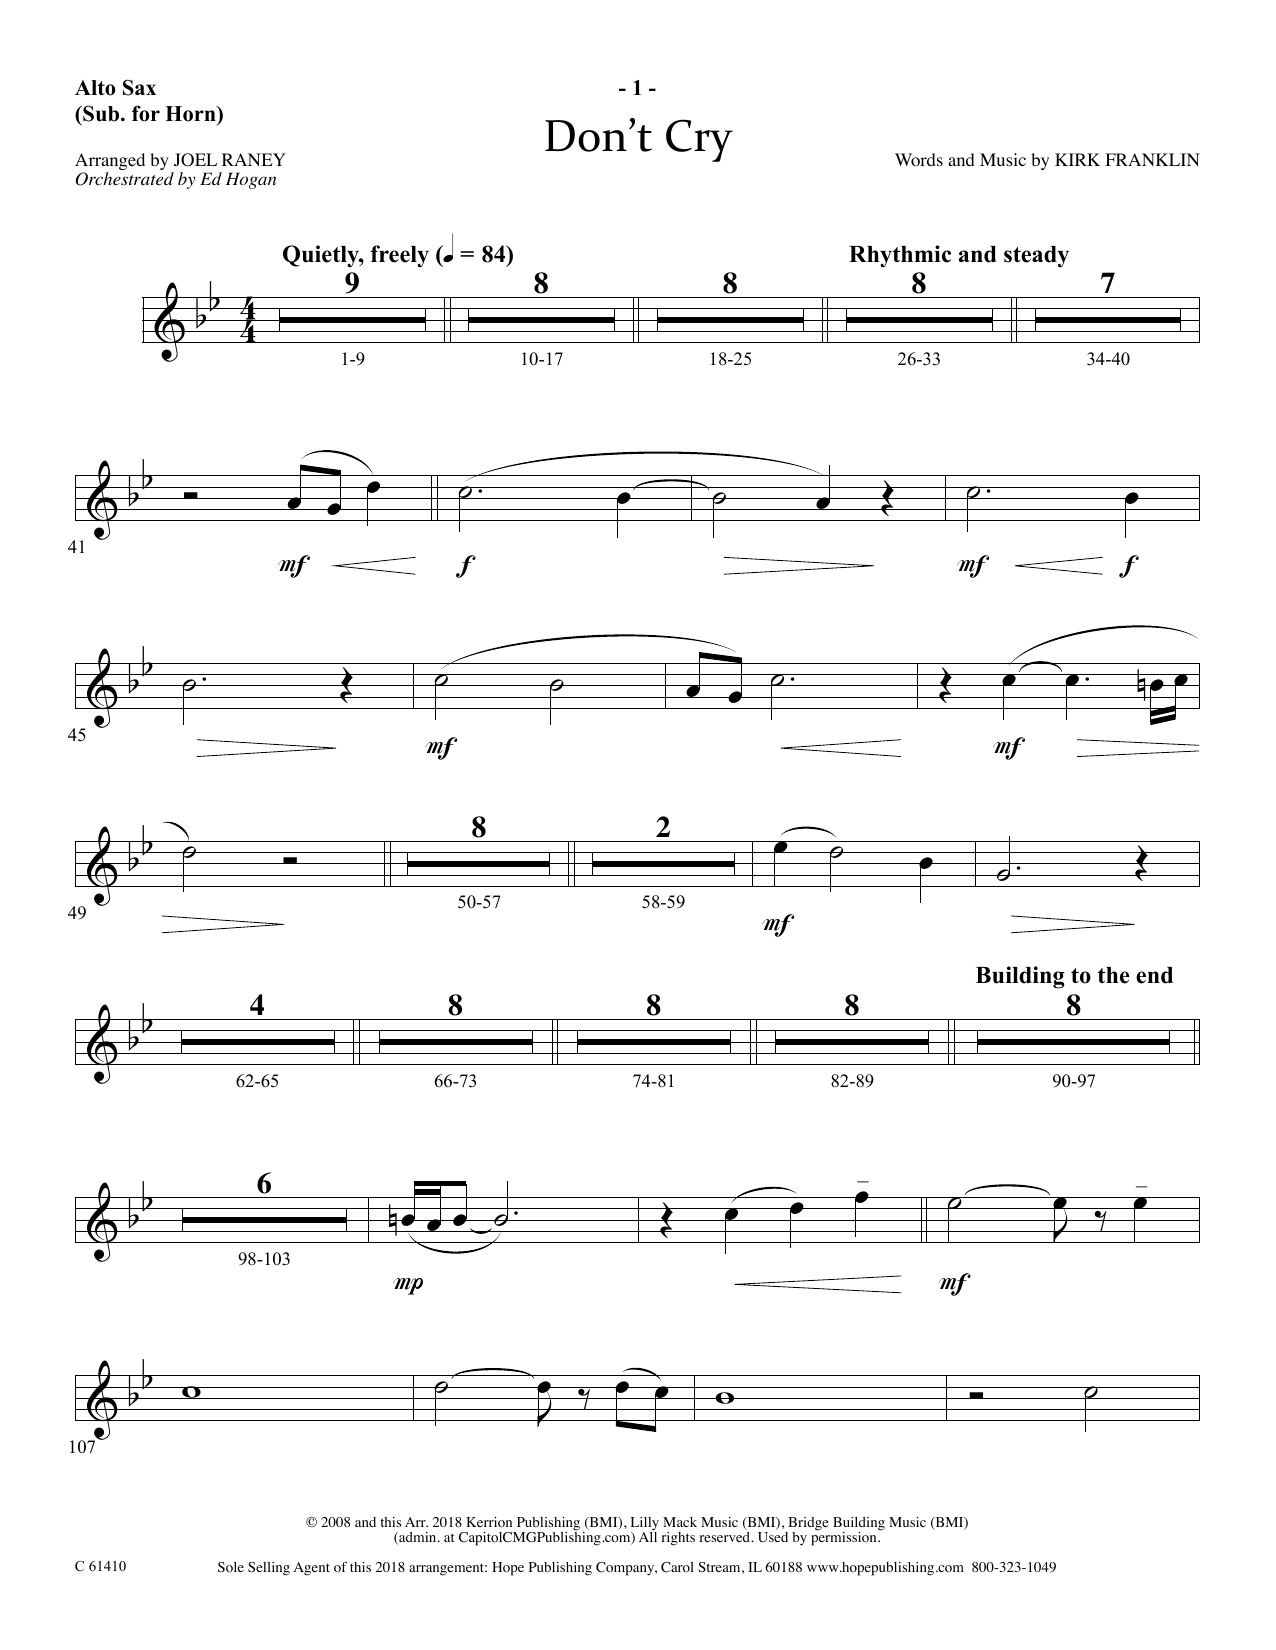 Download Joel Raney Don't Cry - Alto Sax (Horn sub.) Sheet Music